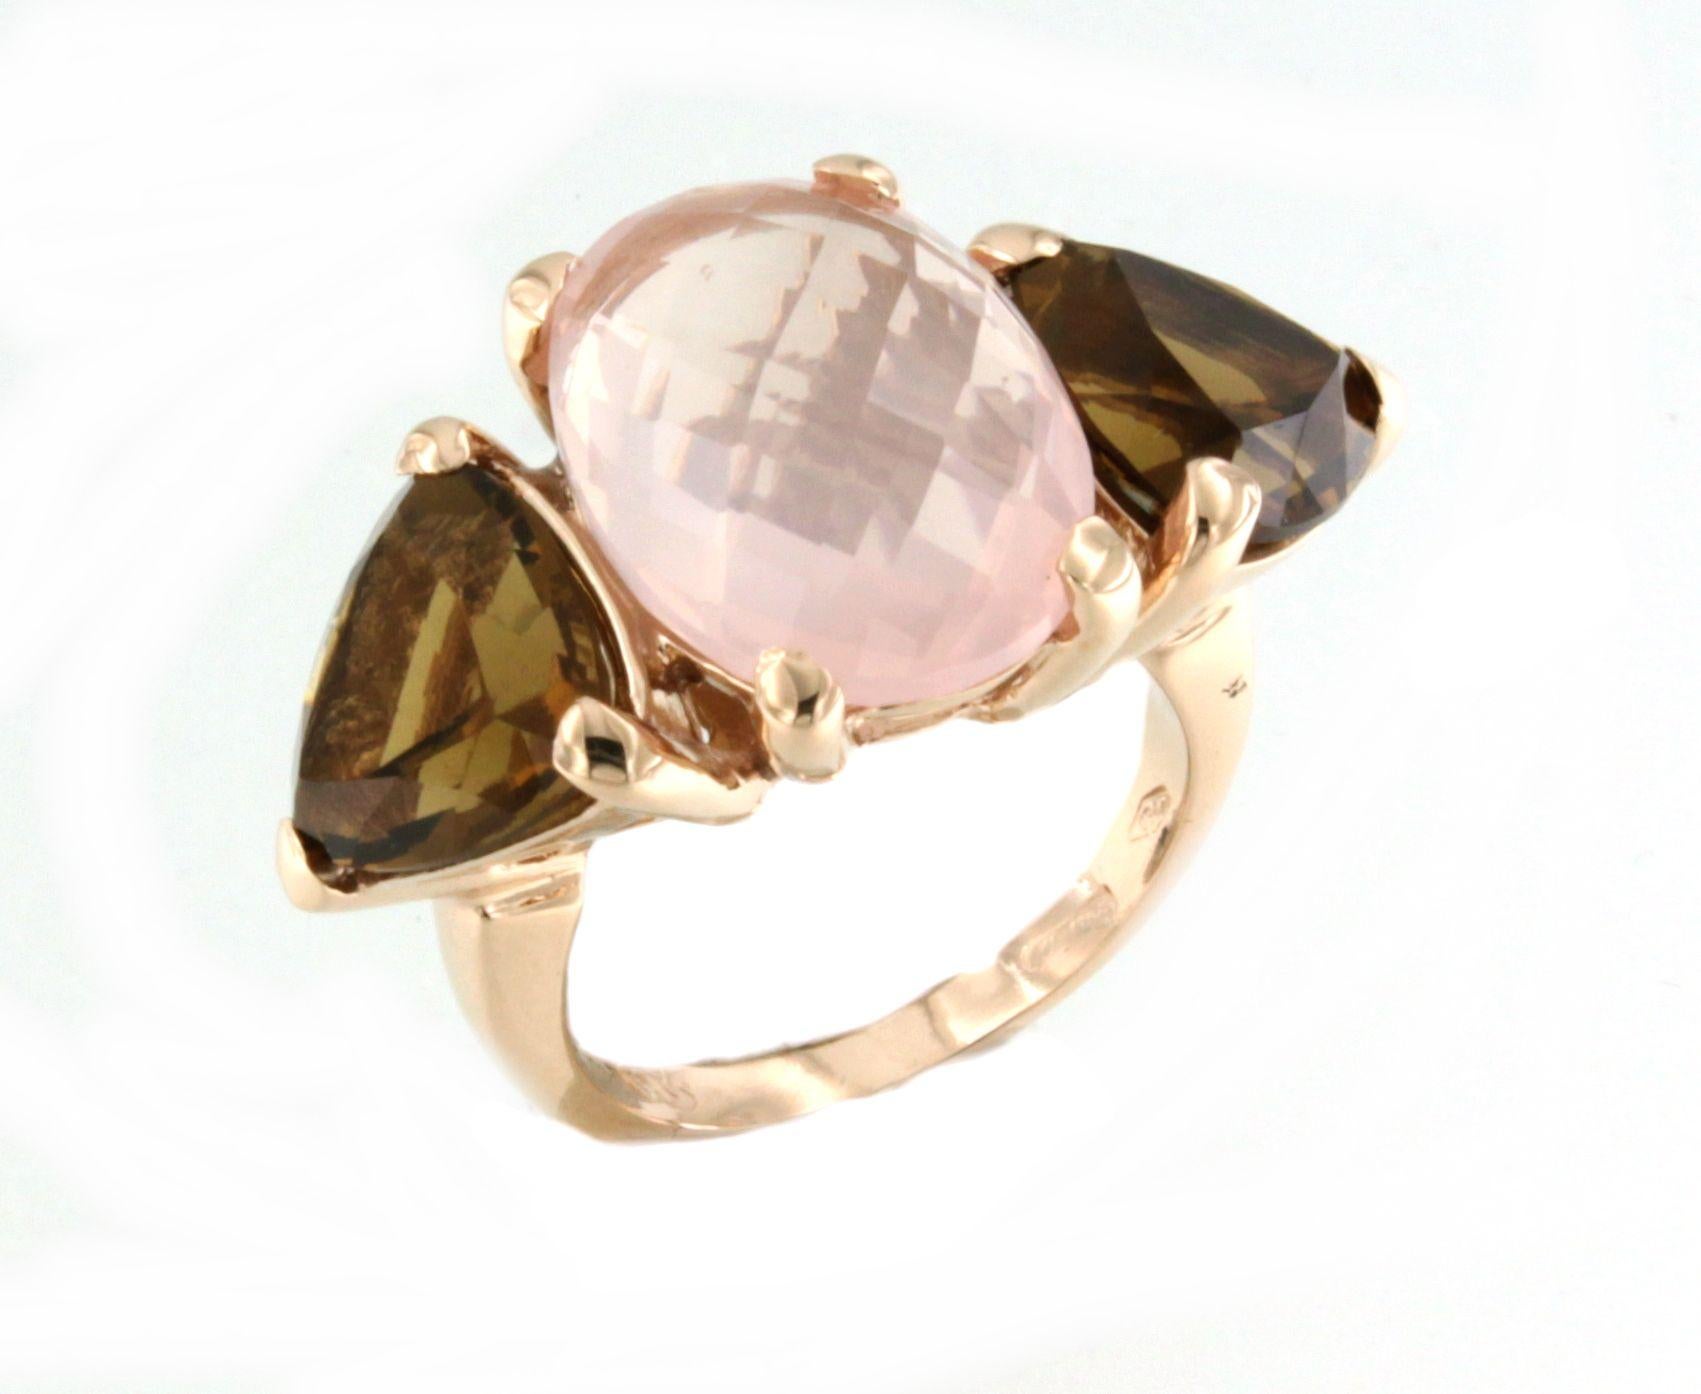 Amazing and  unique ring for a special person or for a gift. 
 Combination of shapes and colors made a unique fashion and modern ring in 18k rose gold with colored stones. Made in Italy by Stanoppi Jewellery since 1948.
Stones: Pink quartz oval